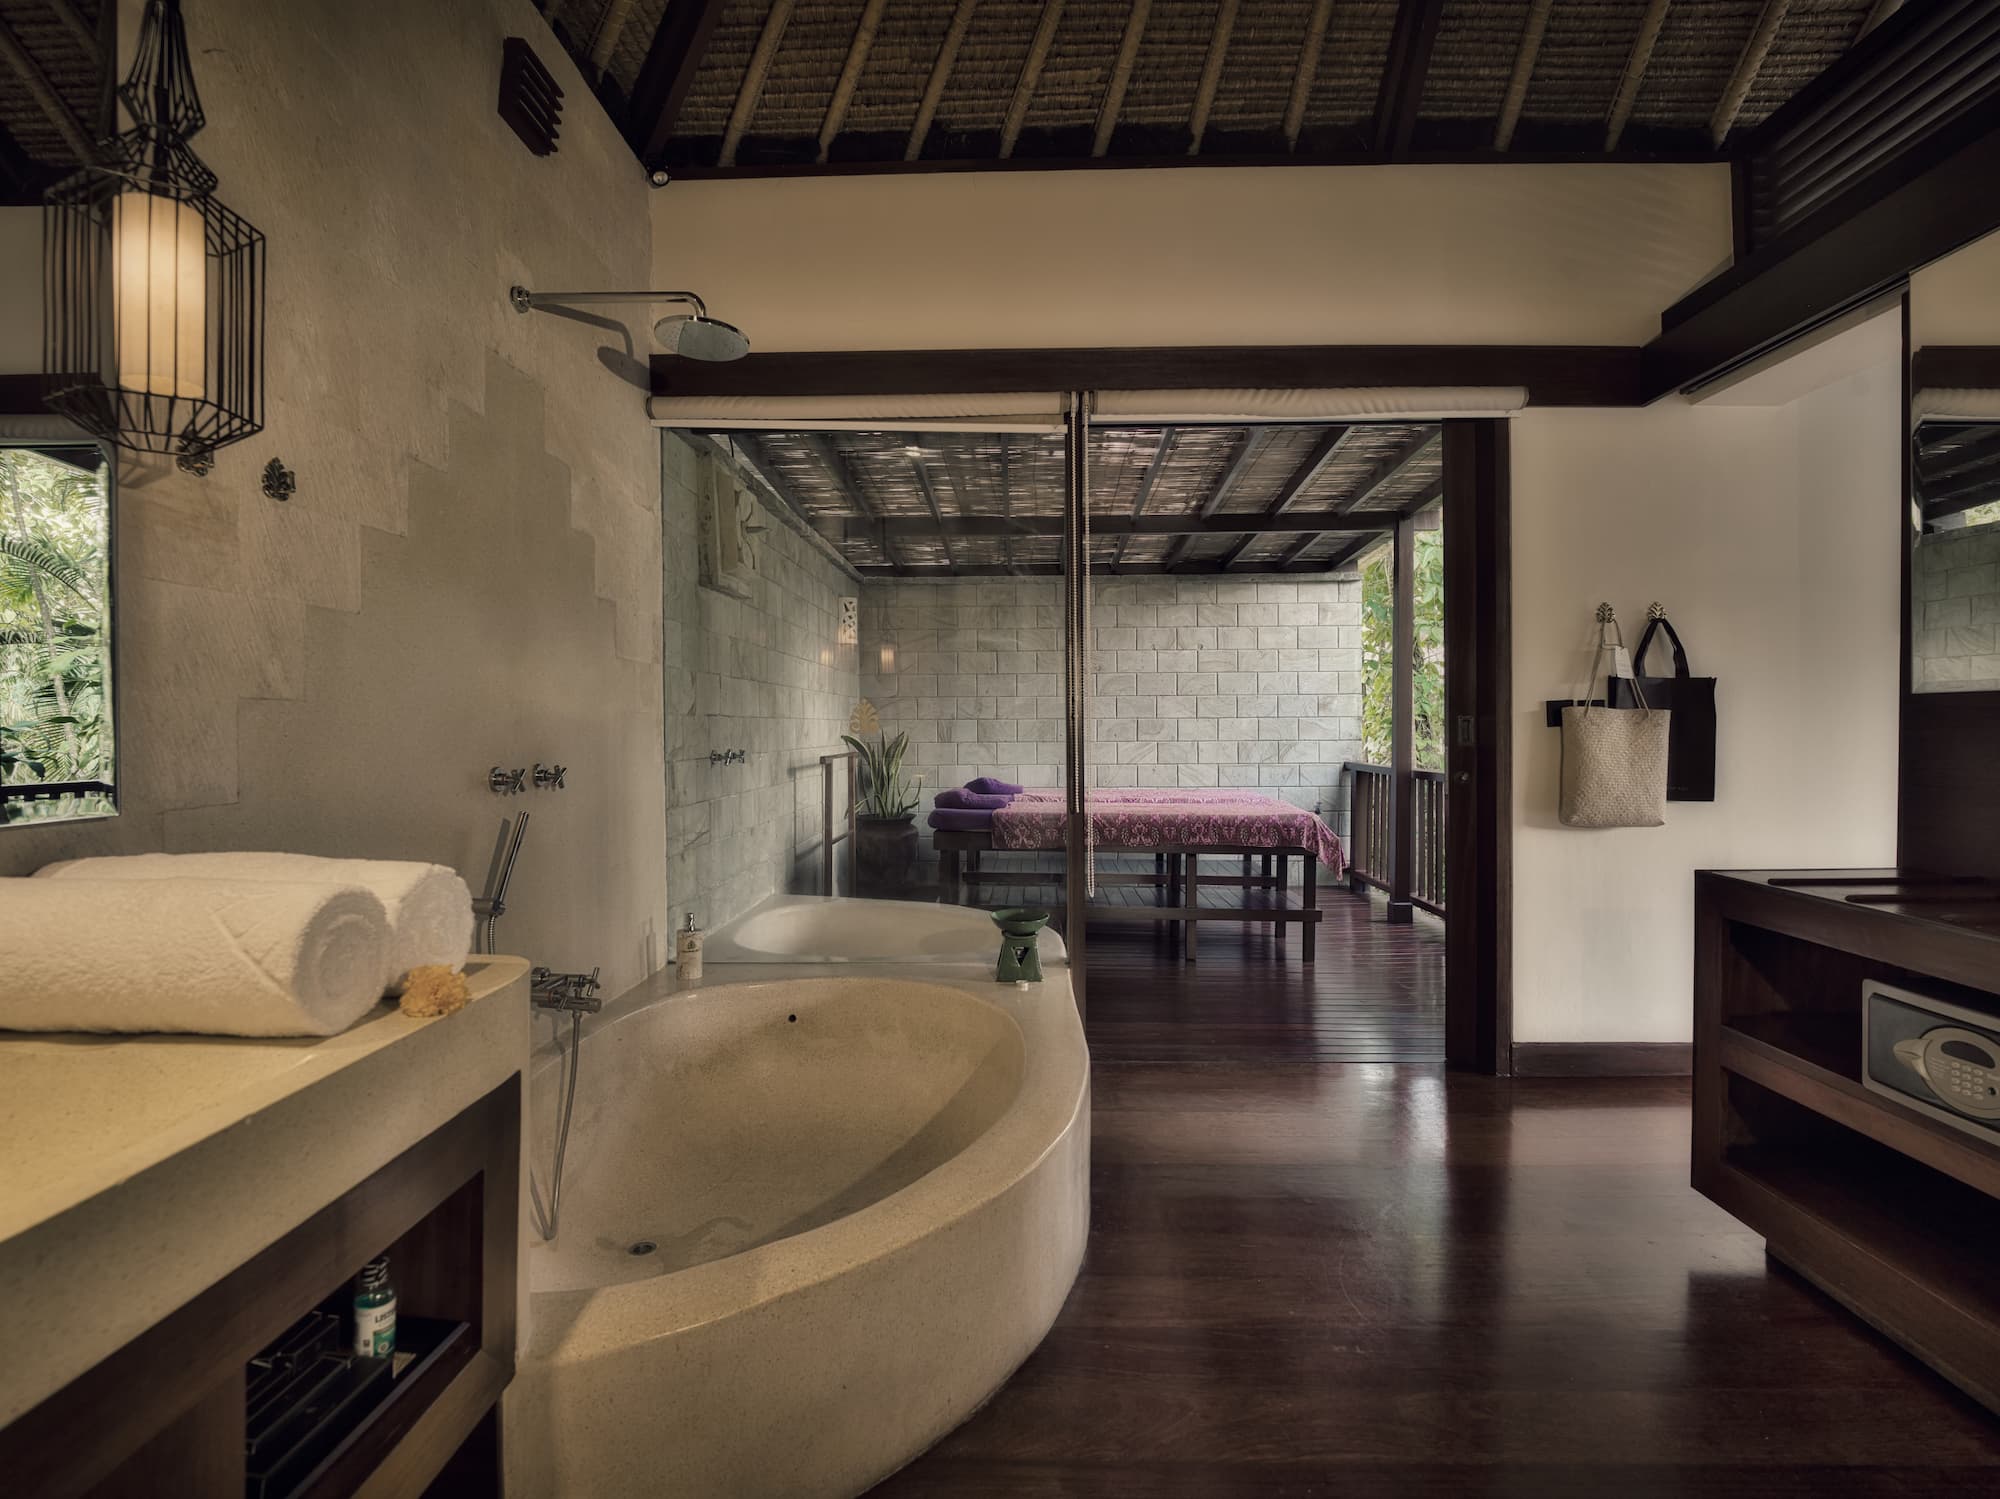 Bathroom with spa room view